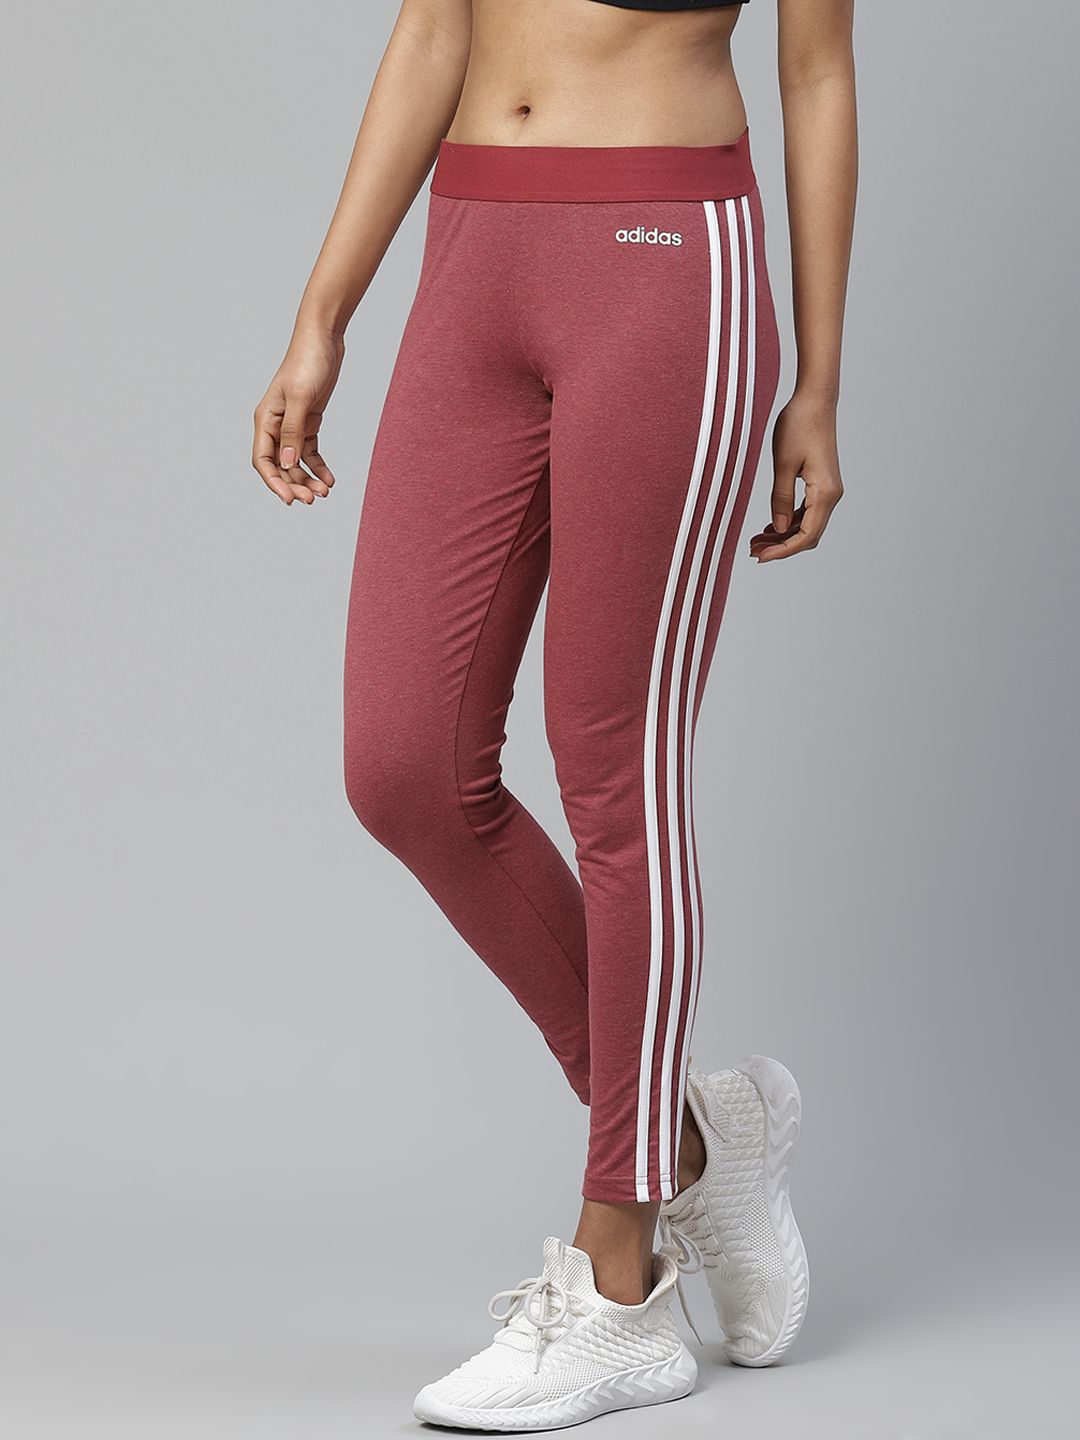 ADIDAS Women Rust Red Solid Essentials 3-Stripes Tights Price in India